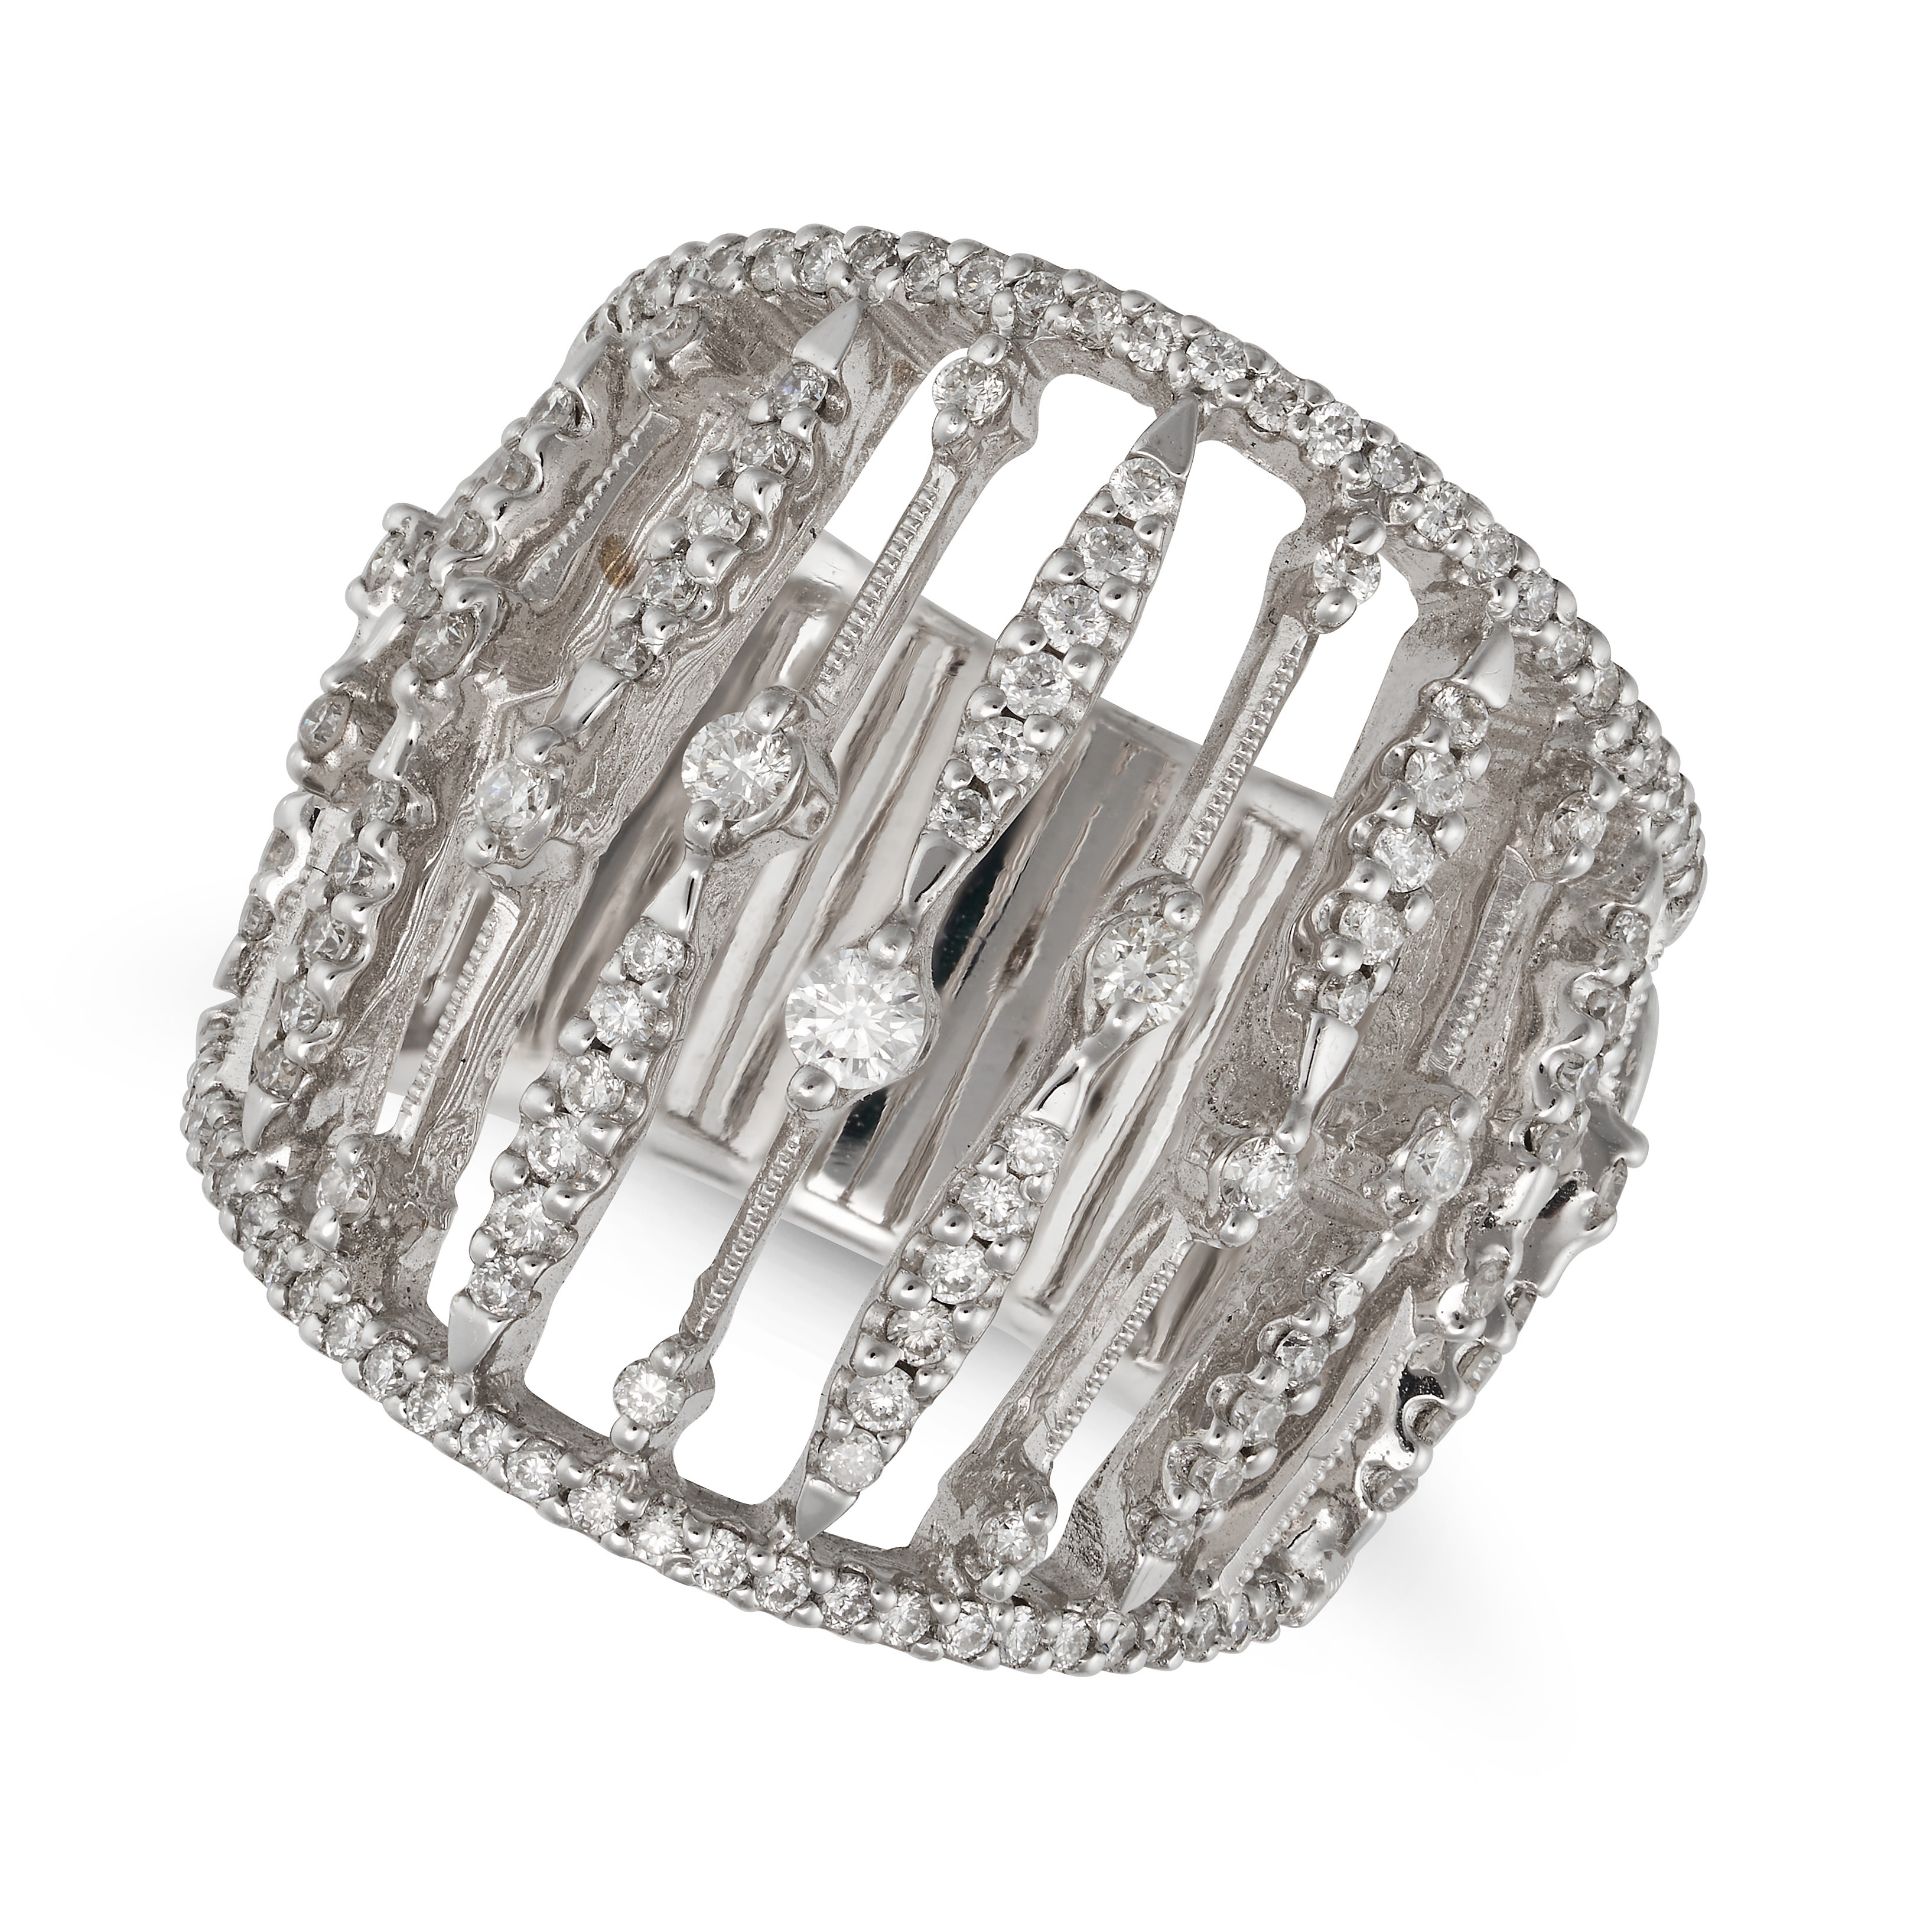 A DIAMOND DRESS RING in 18ct white gold, the openwork bombe ring set with round brilliant cut dia...